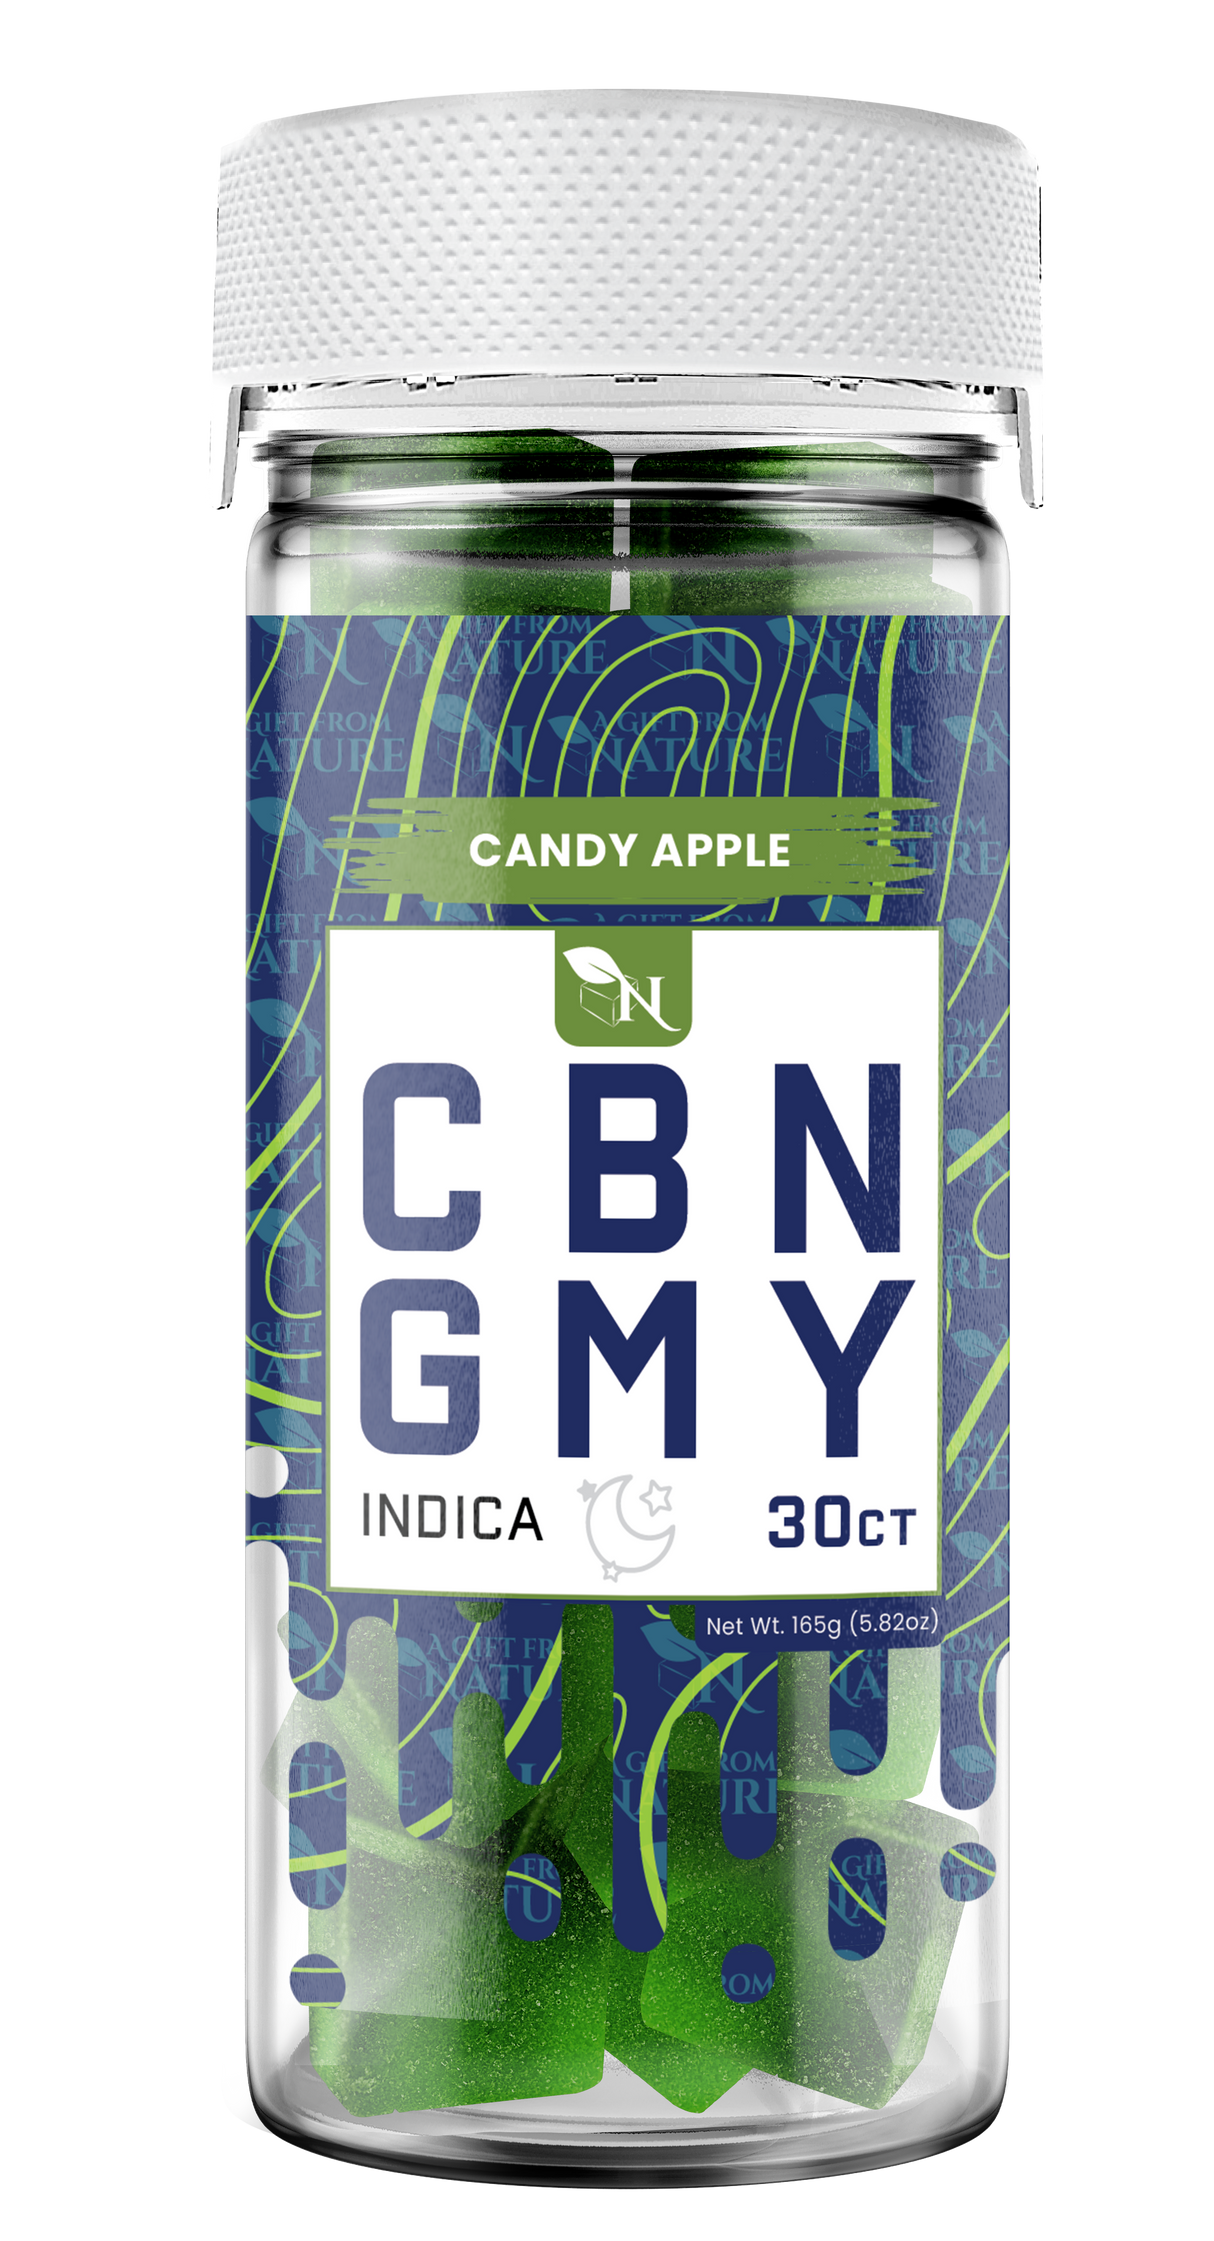 AGFN CBN Gummy: Candy Apple Indica (1500MG)